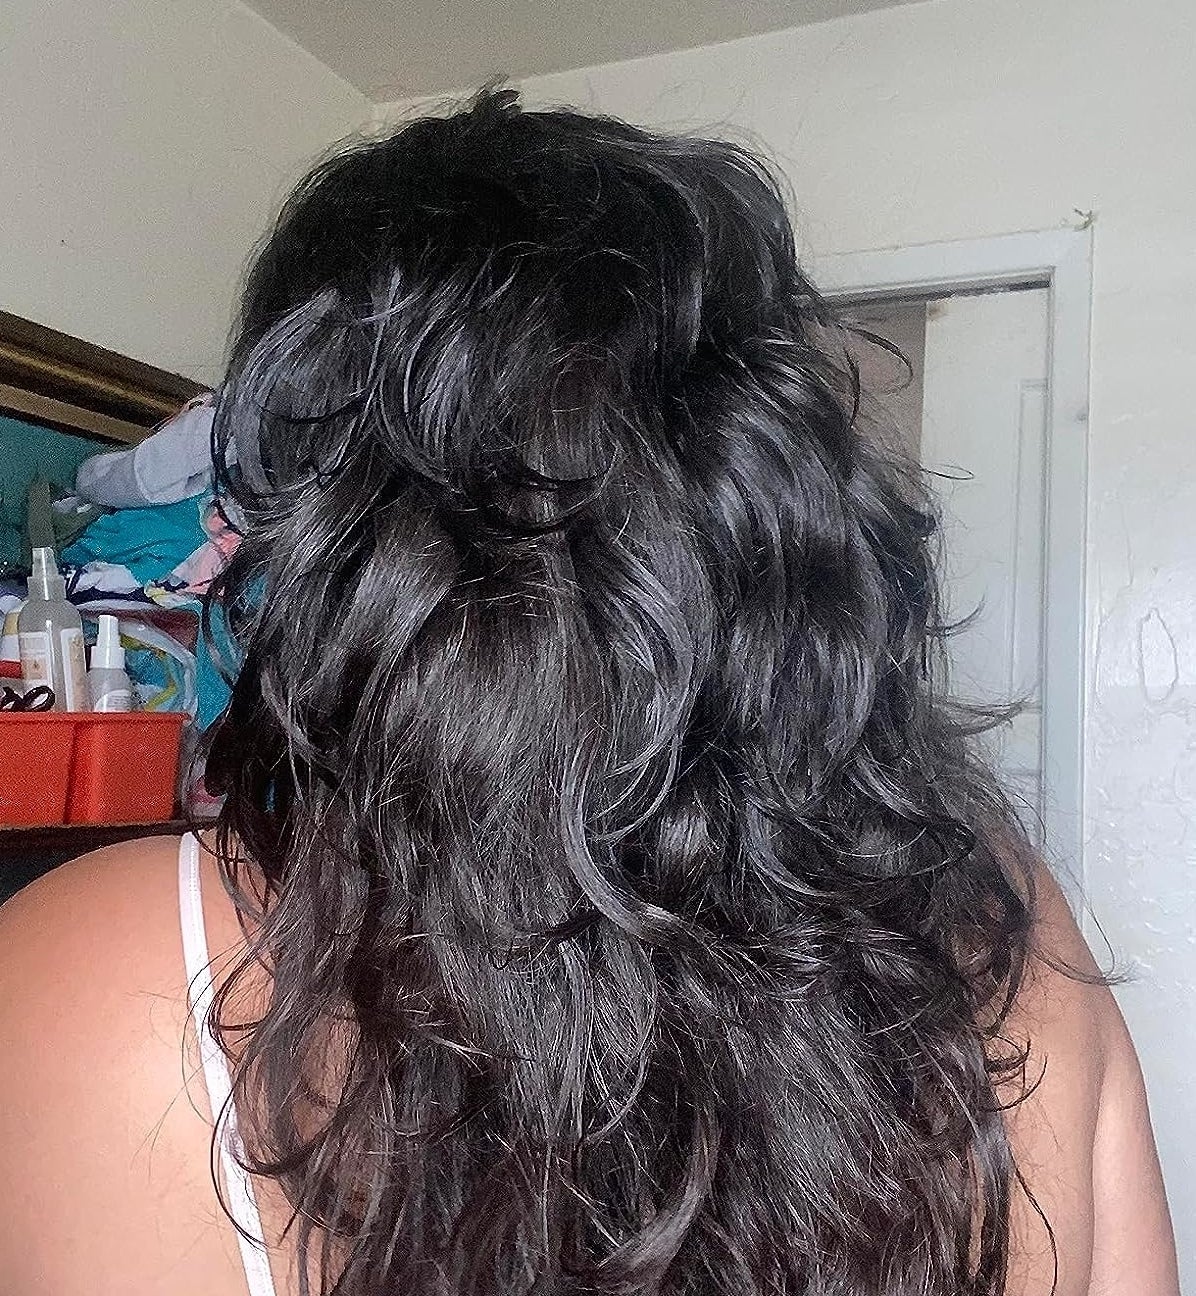 Reviewer’s photo of the back of their hair